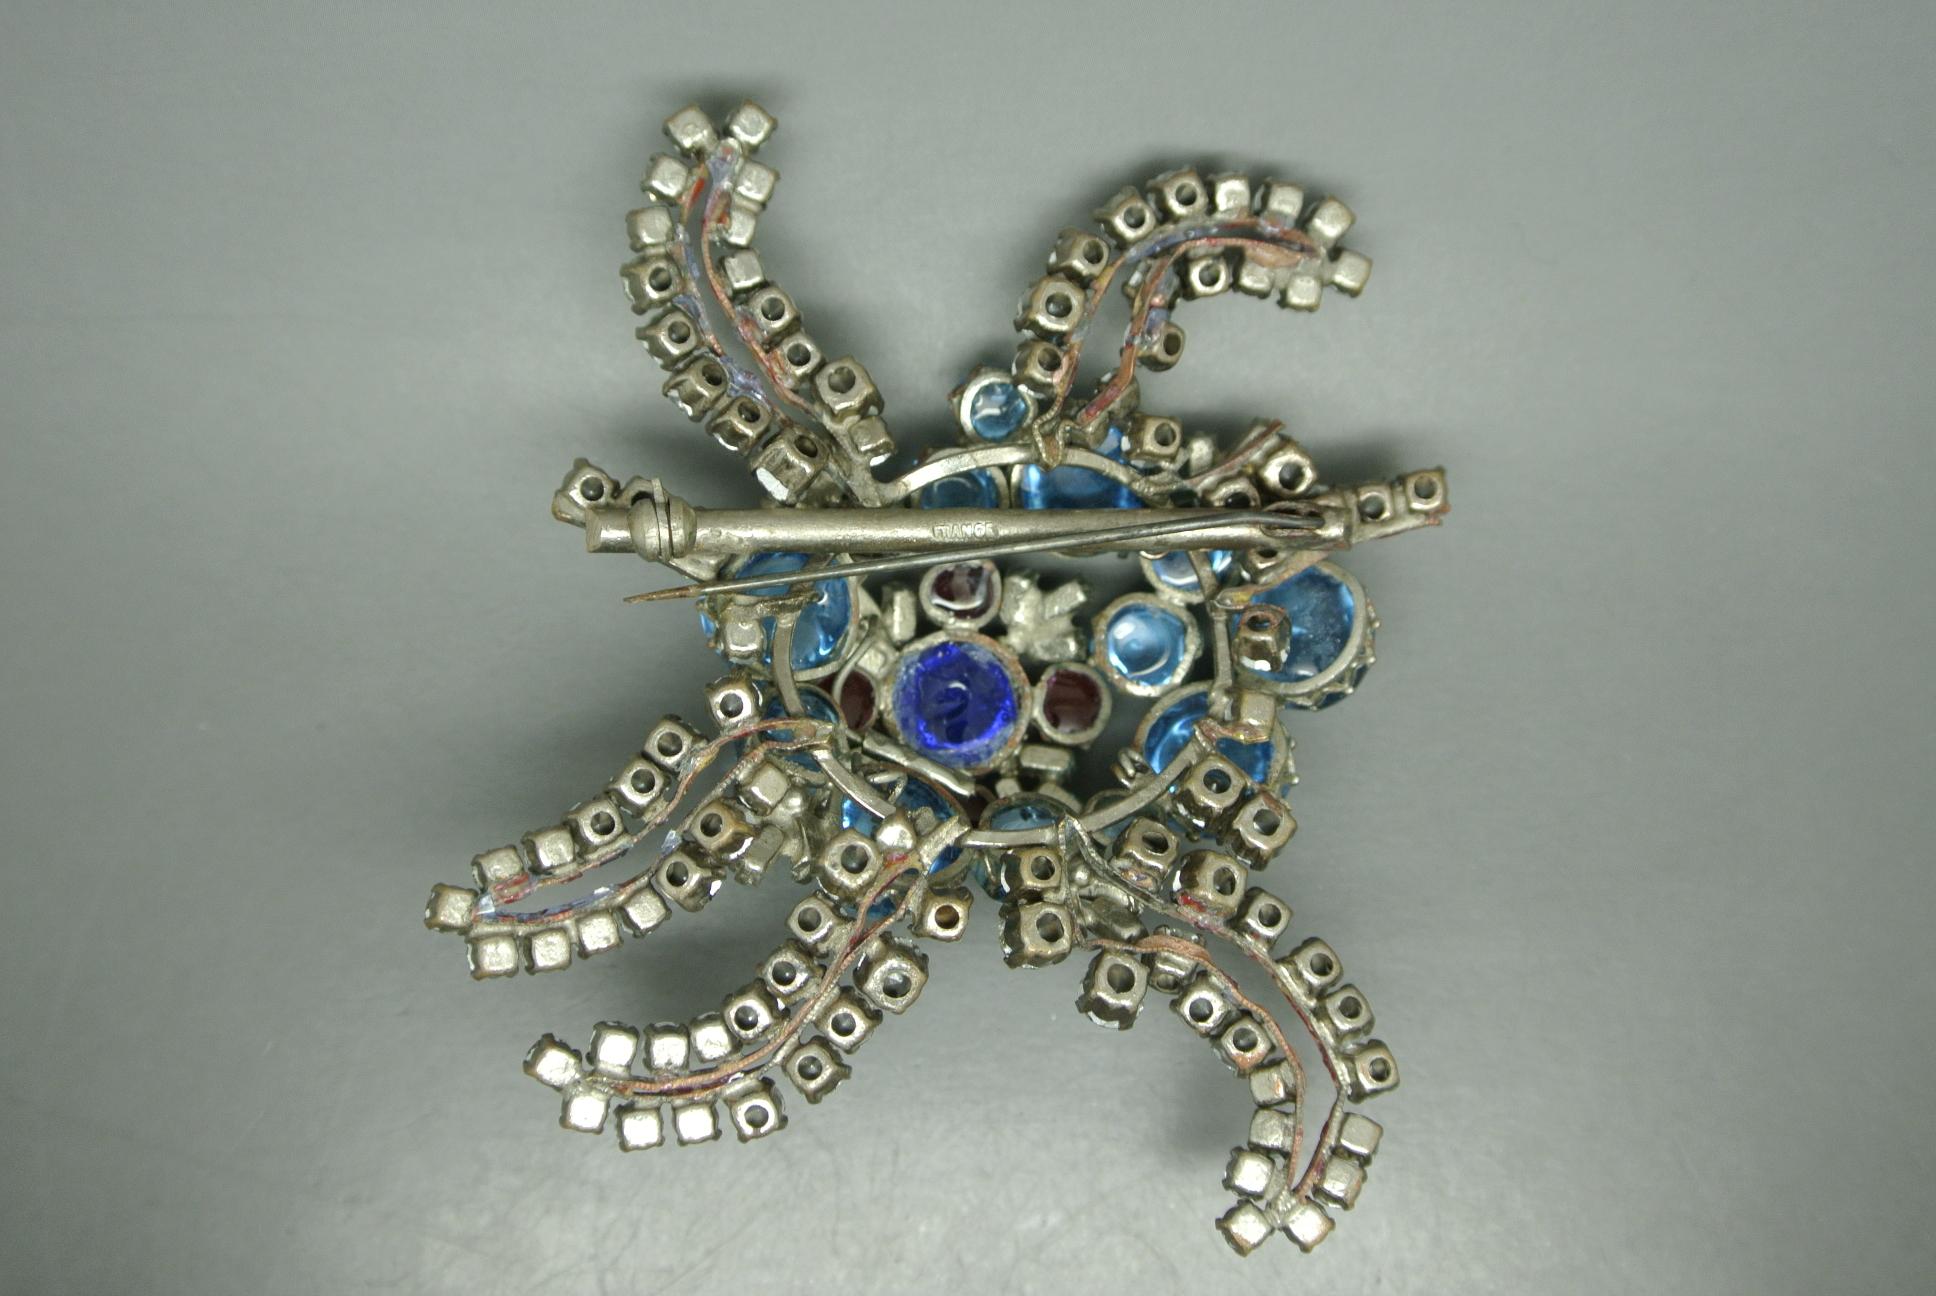 French brooch
Made by Gripoix workshop in paris
Very rare one
Dated 1950s